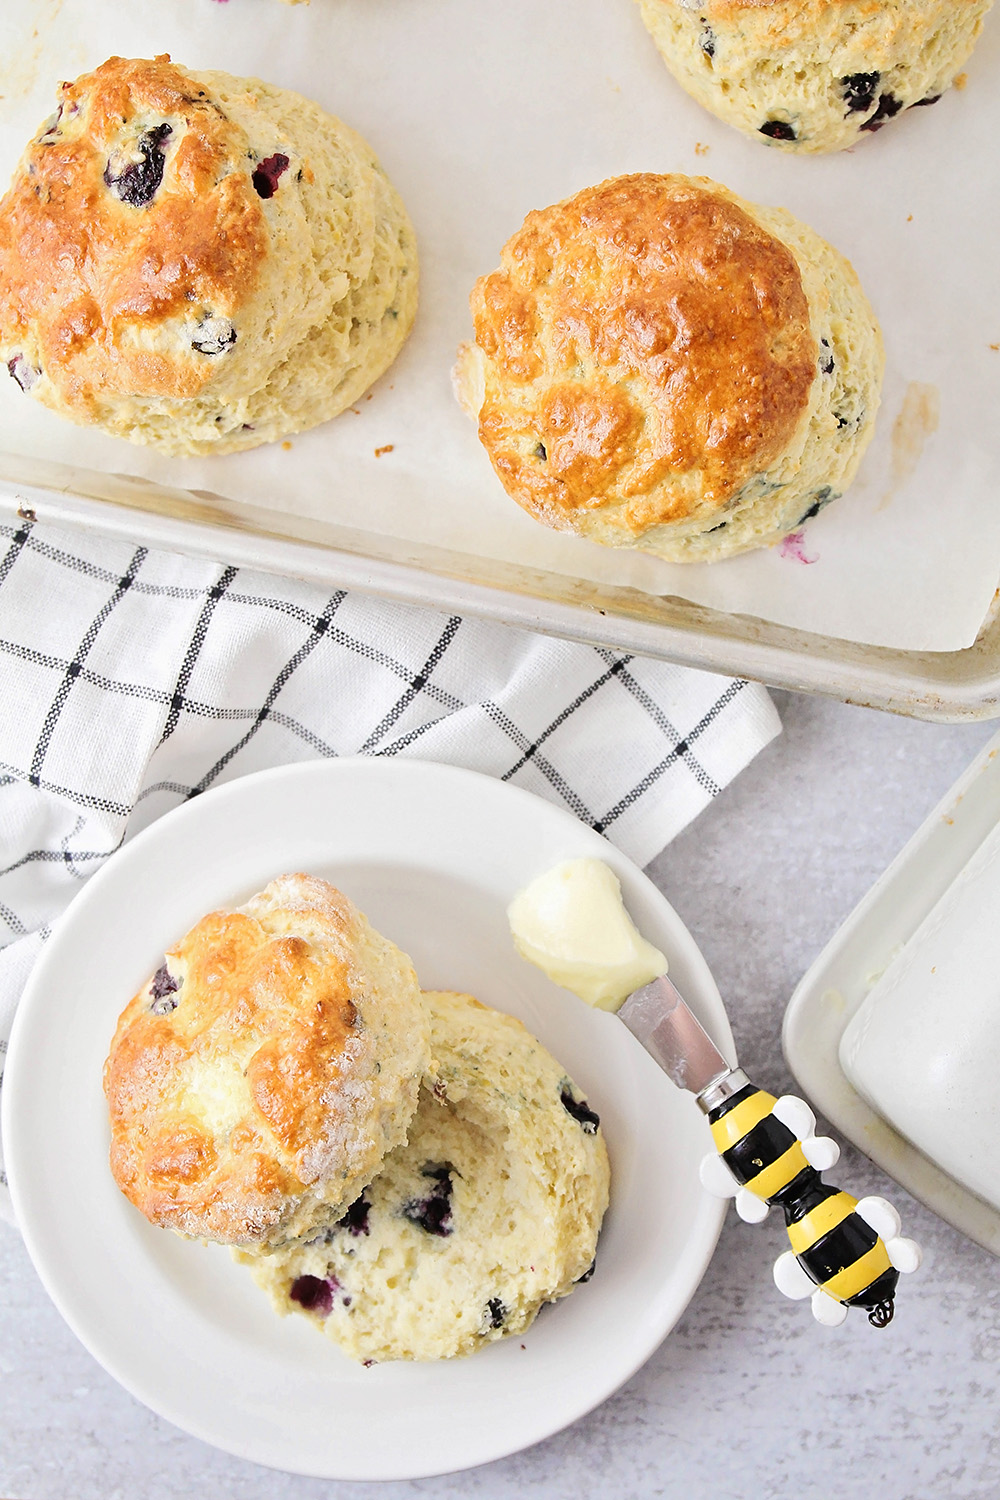 These huckleberry scones are so light and tender, with the perfect texture! They're amazingly delicious!